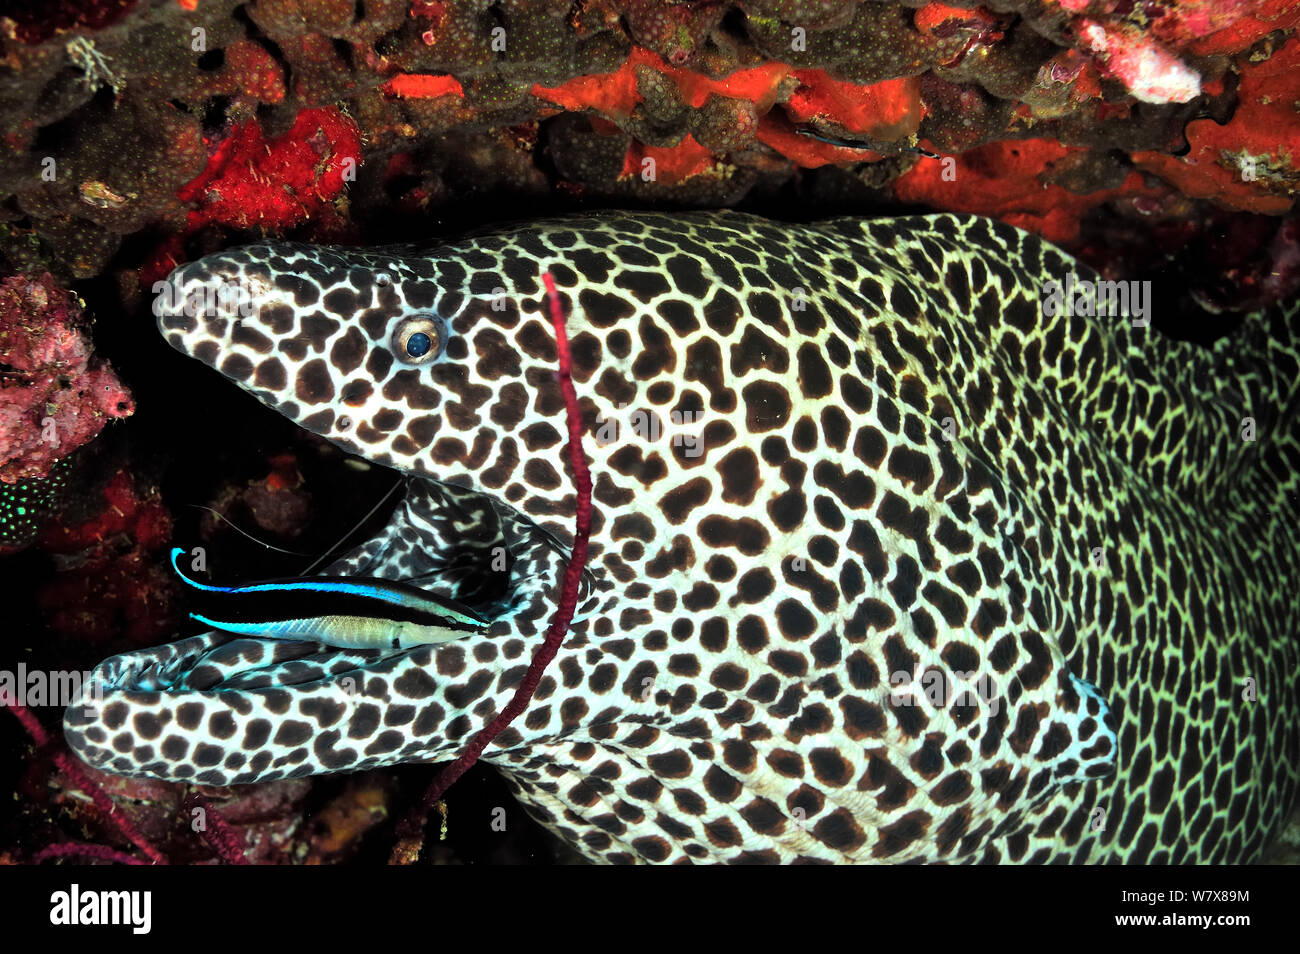 Honeycomb moray (Gymnothorax favagineus) having its mouth cleaned by a common cleanerfish (Labroides dimidiatus), Daymaniyat islands, Oman. Gulf of Oman. Stock Photo